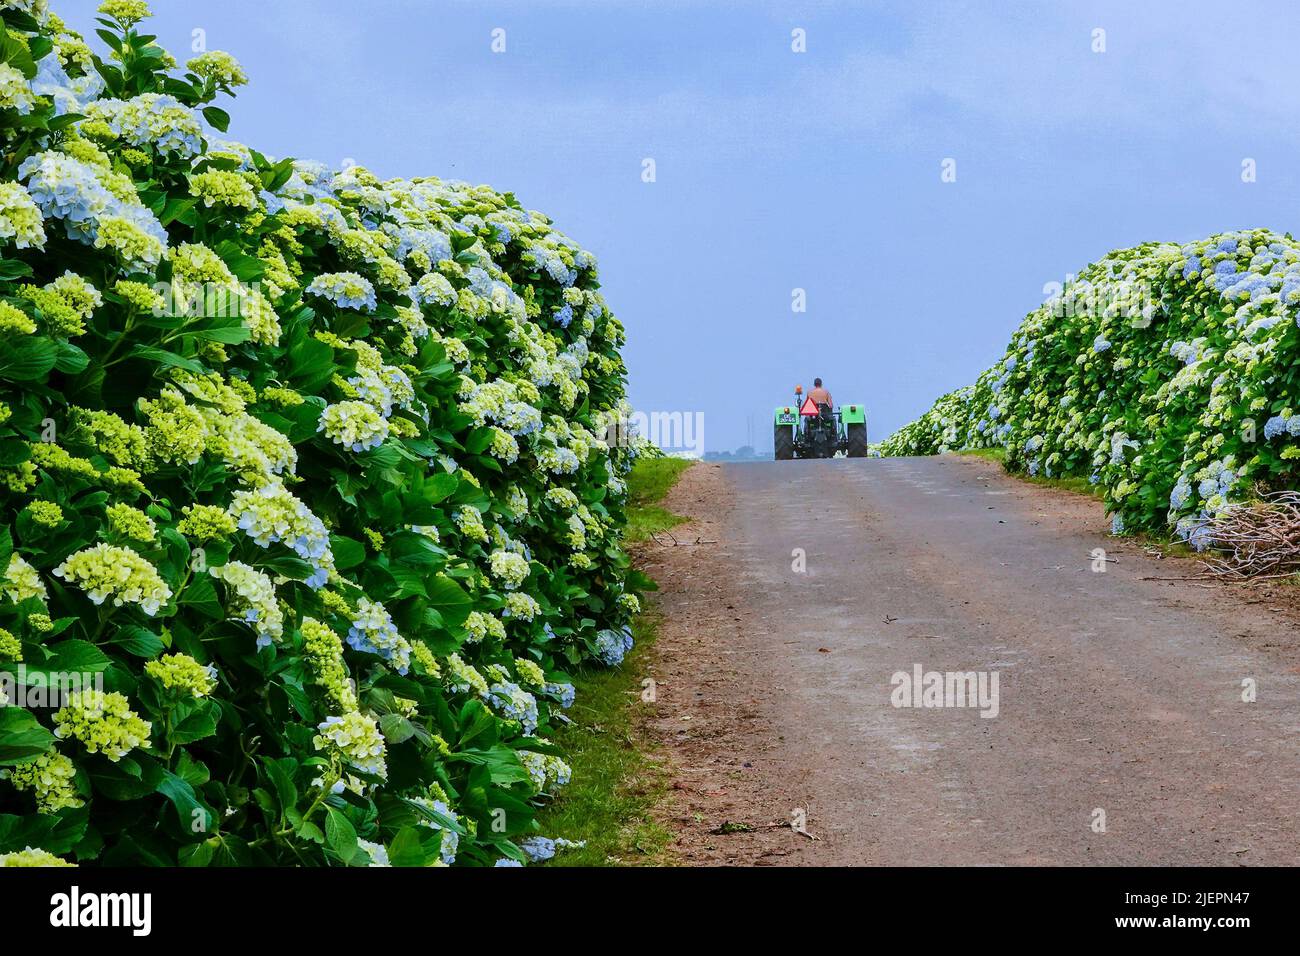 A farm tractor passes through a country road lined by Hydrangea flowers near Agualva, Terceira Island, Azores, Portugal. The tiny Azores are covered by wild hydrangea shrubs Stock Photo